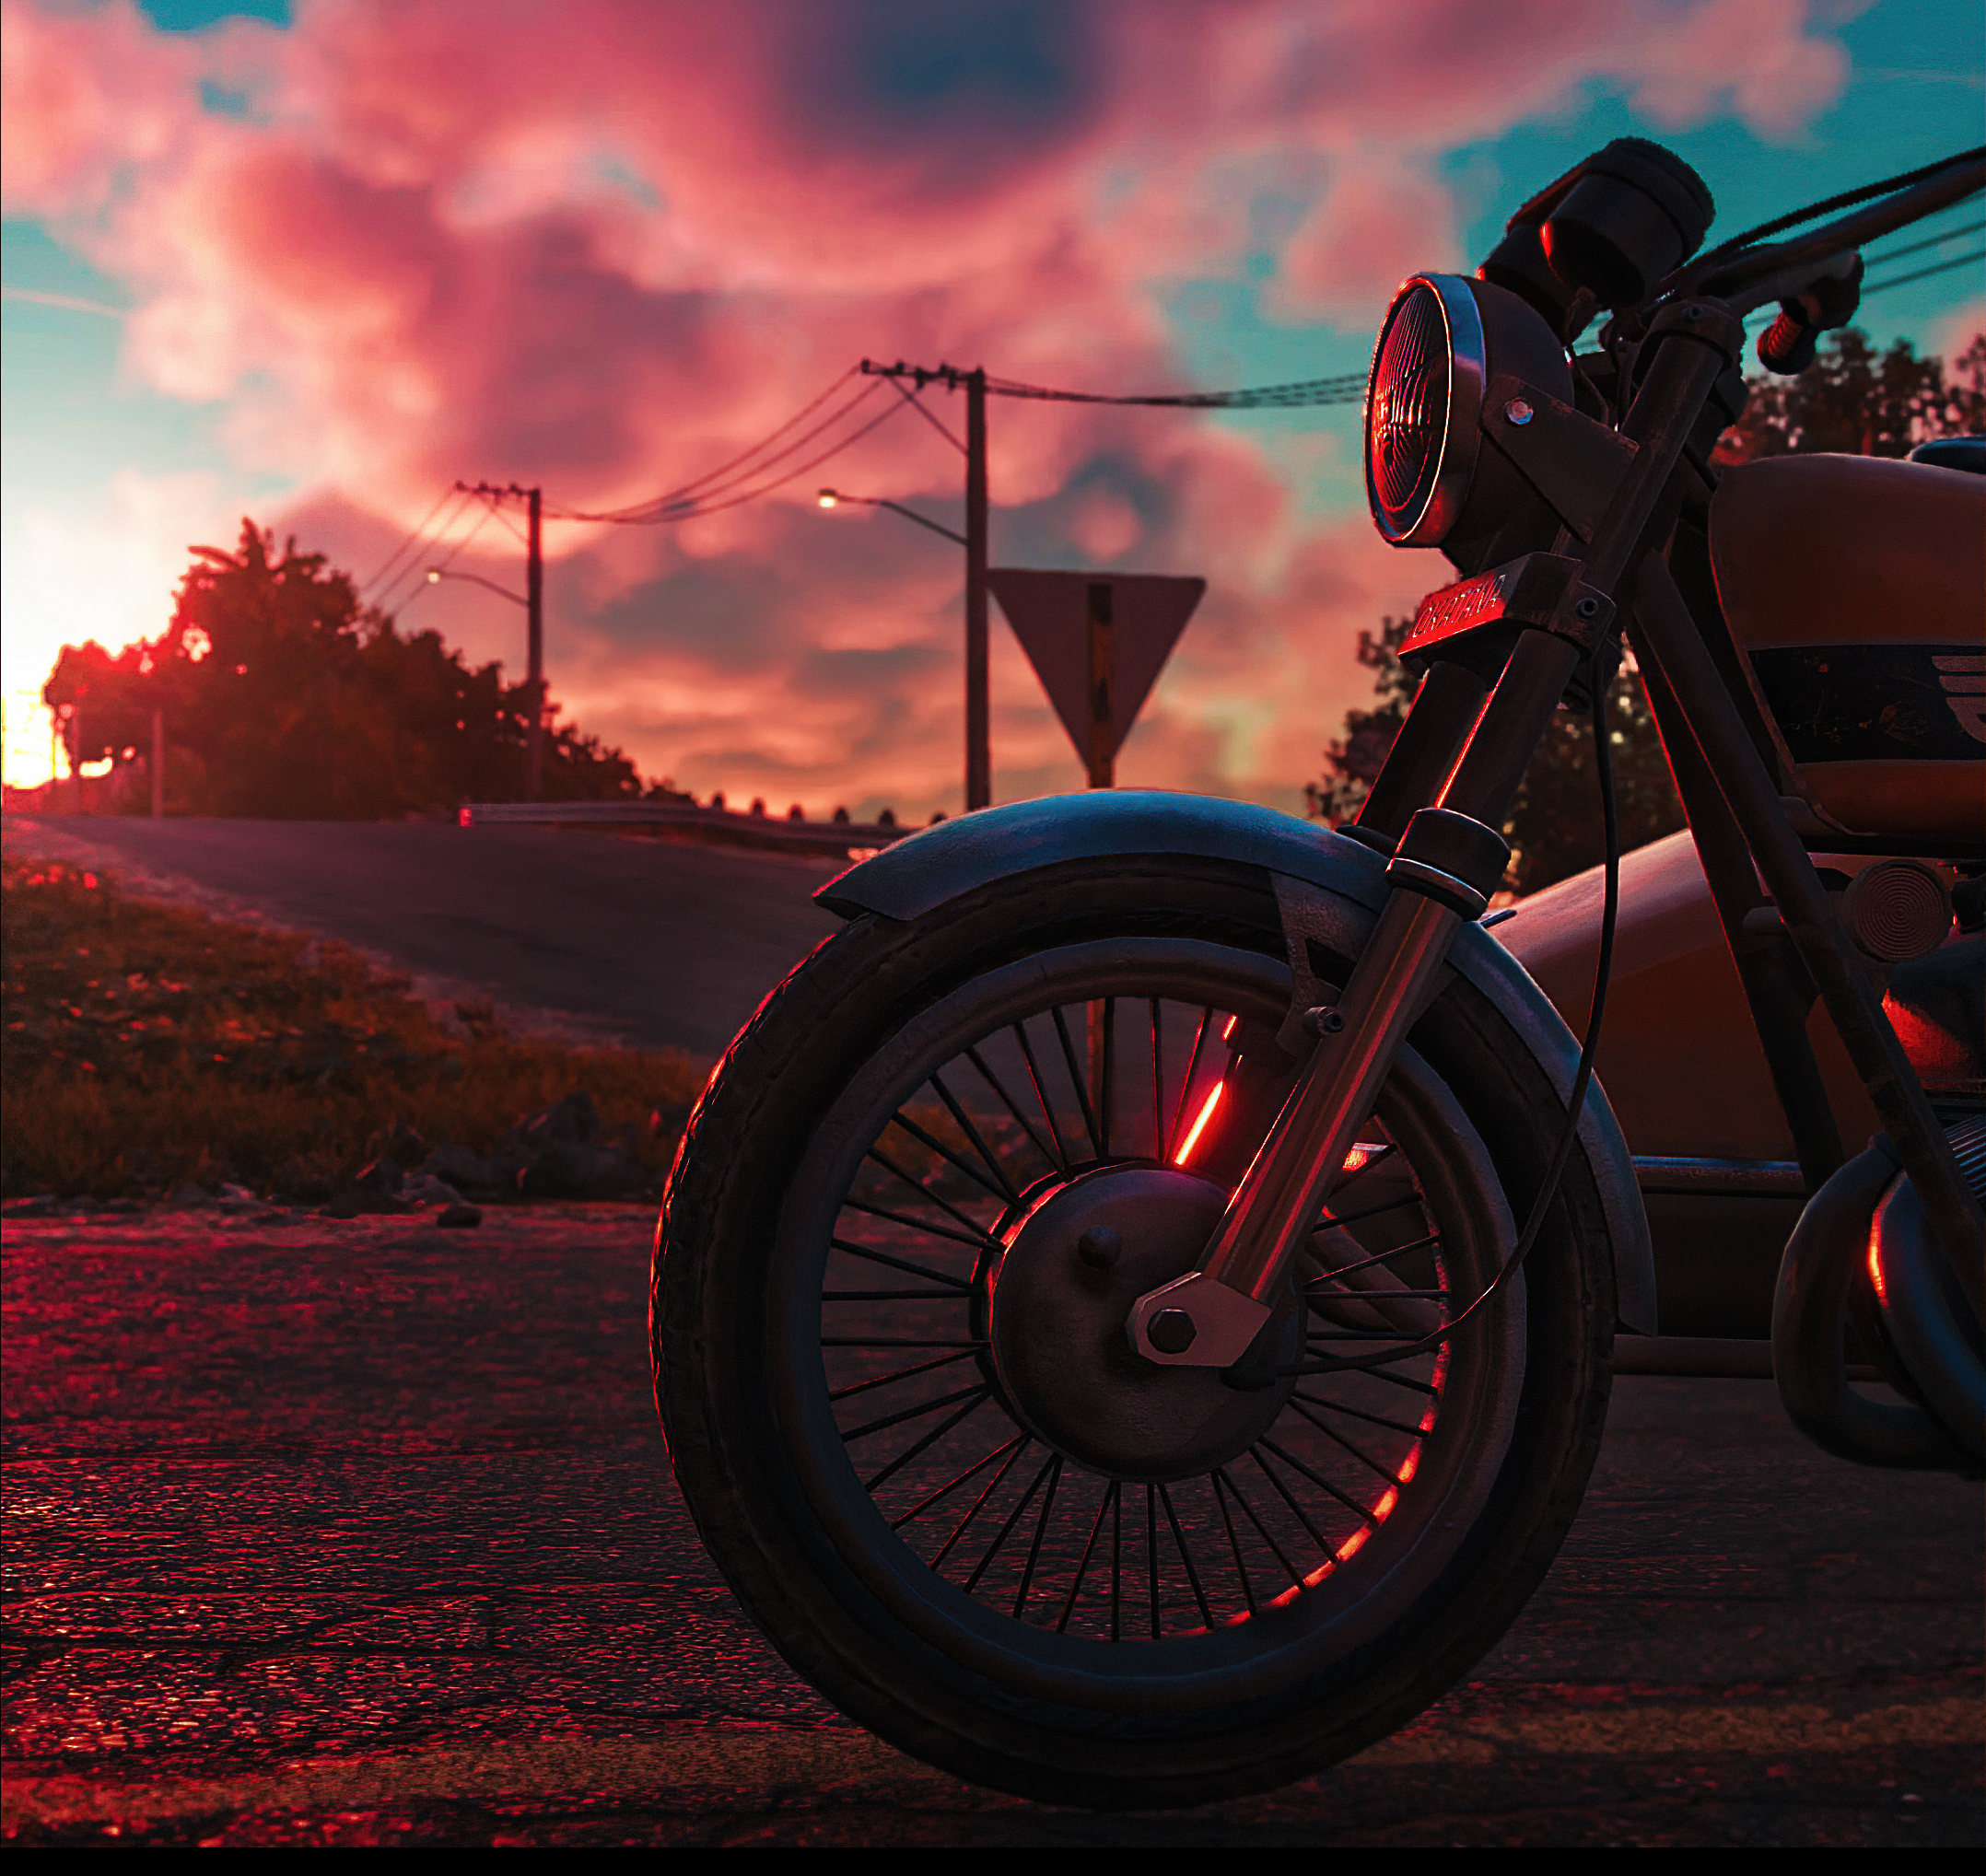 Tropical atmosphere and motorcycles.